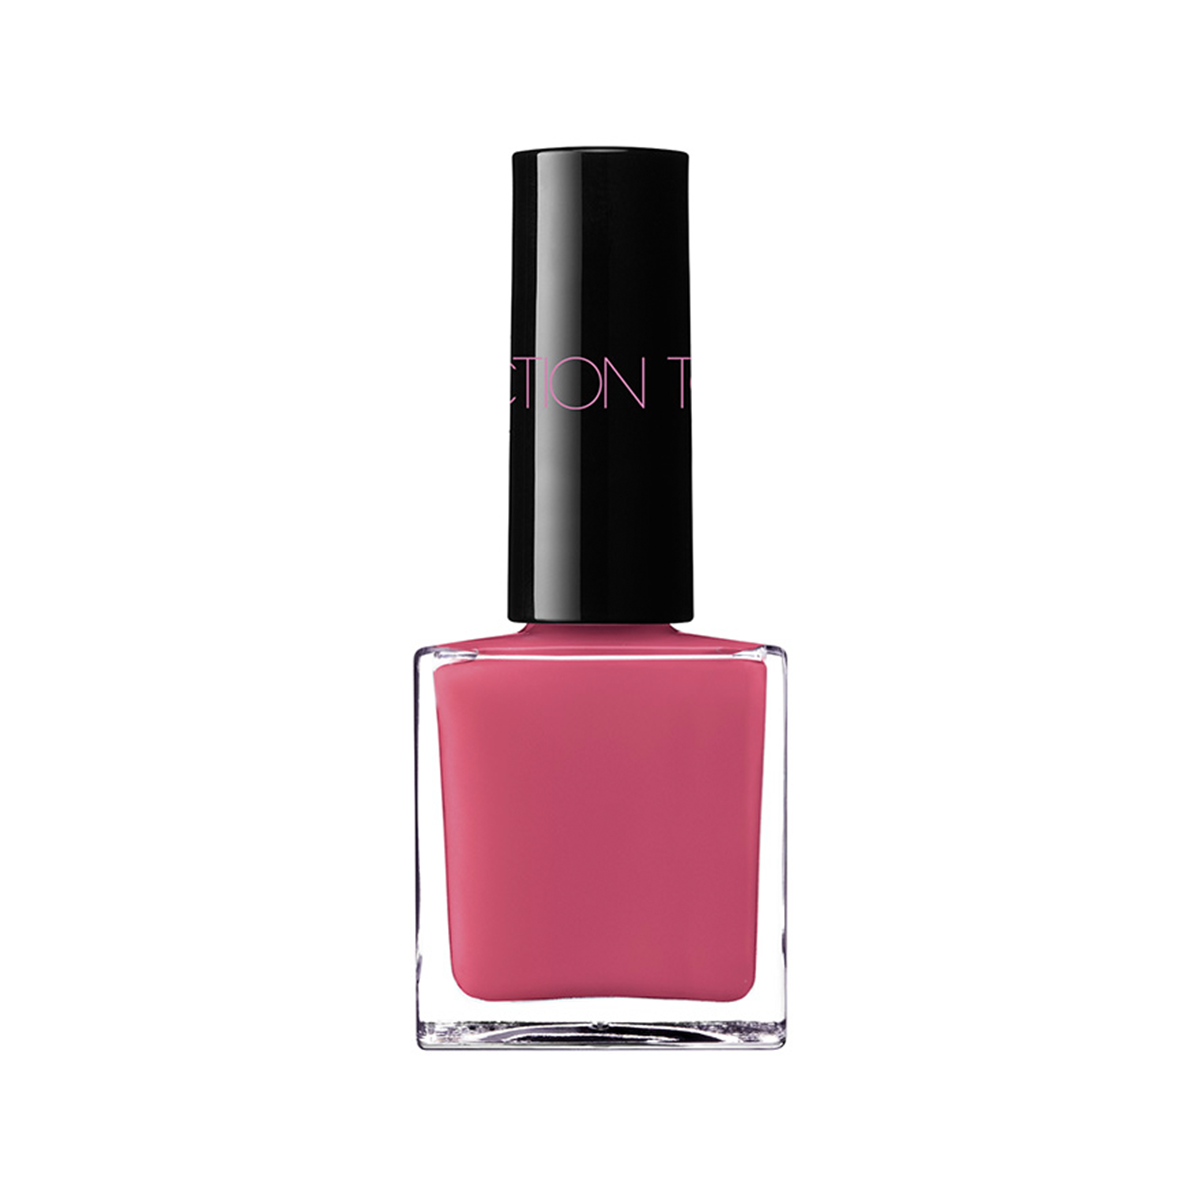 THE NAIL POLISH “ETERNAL IN PINK”